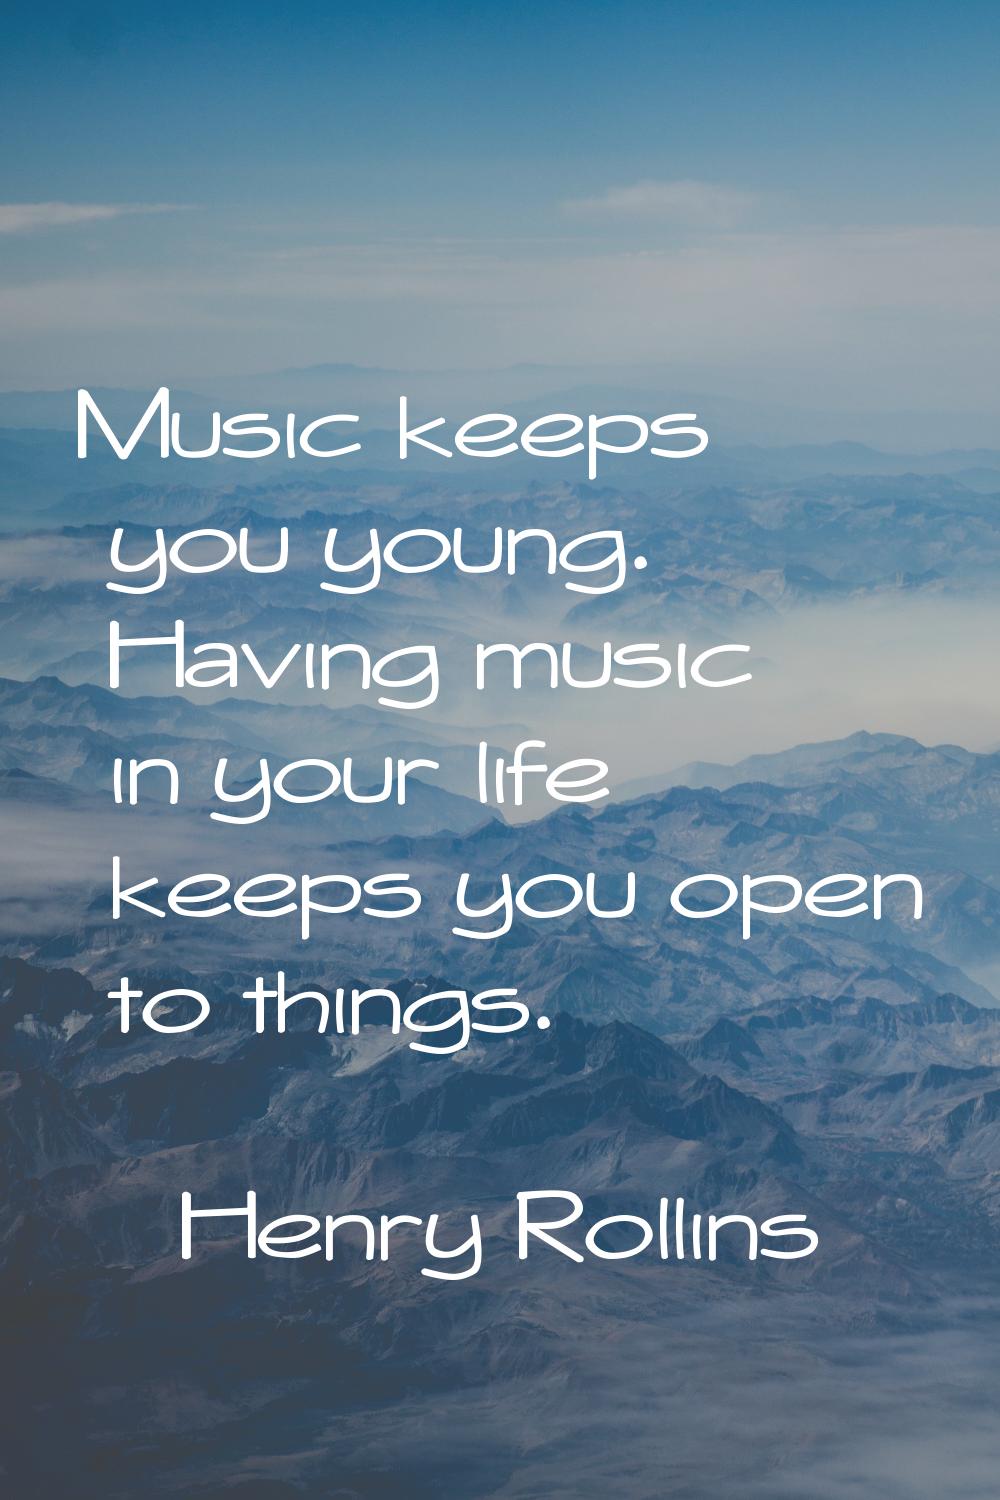 Music keeps you young. Having music in your life keeps you open to things.